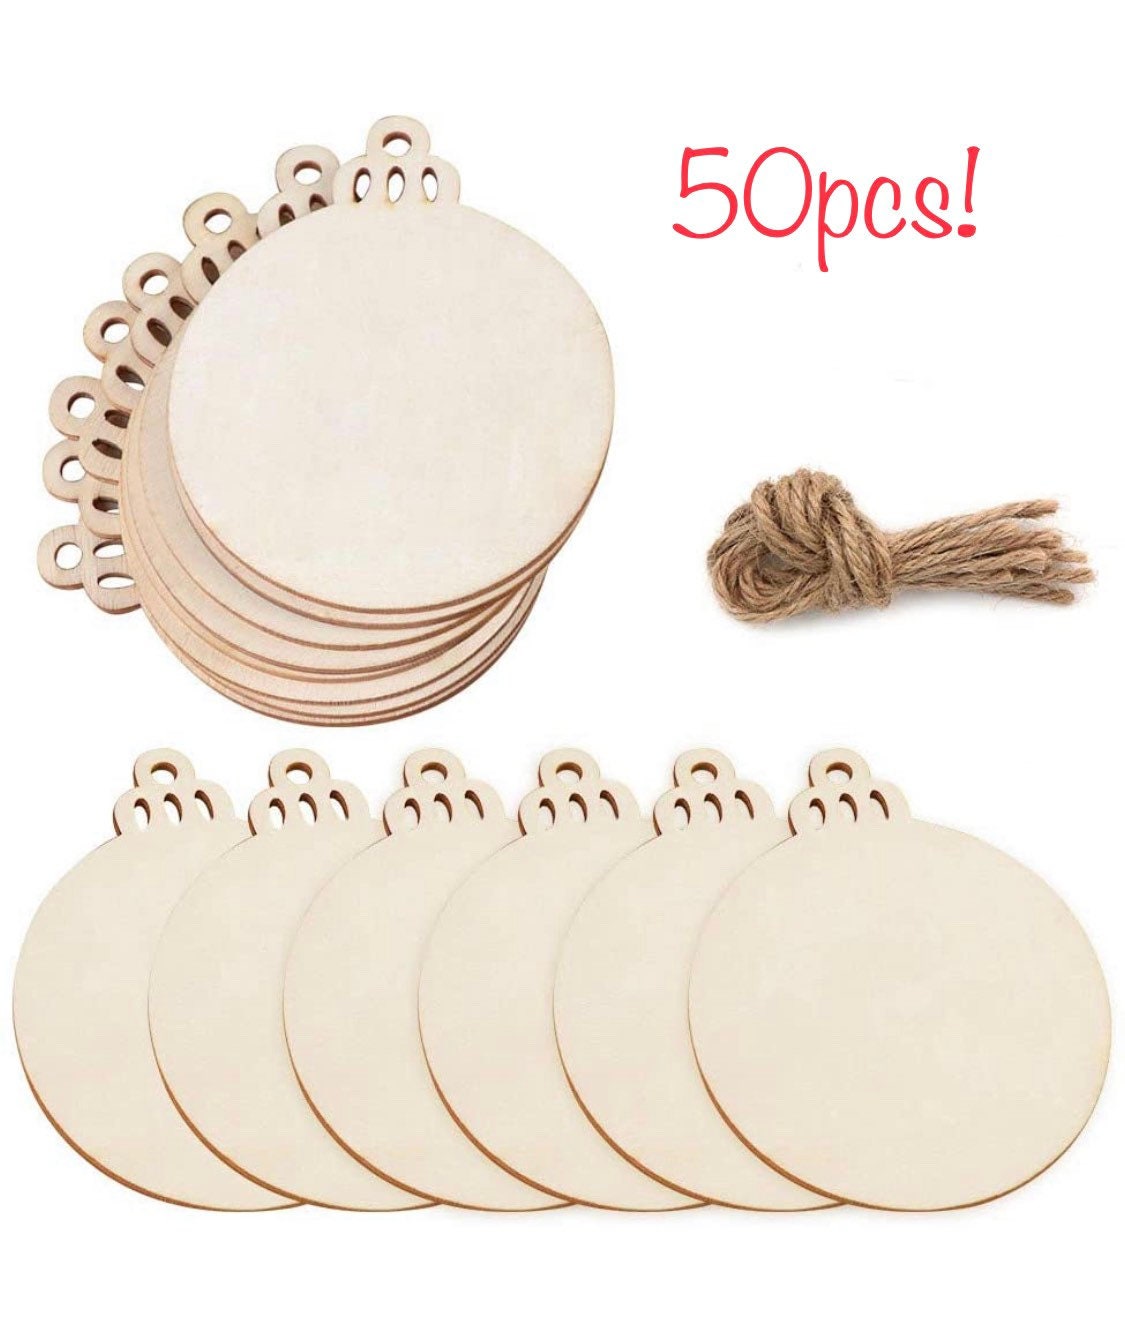 Wooden ornament blanks - predrilled holes - Great for Trees, Wreaths, Gifts, Decor, and Crafts 3.5”